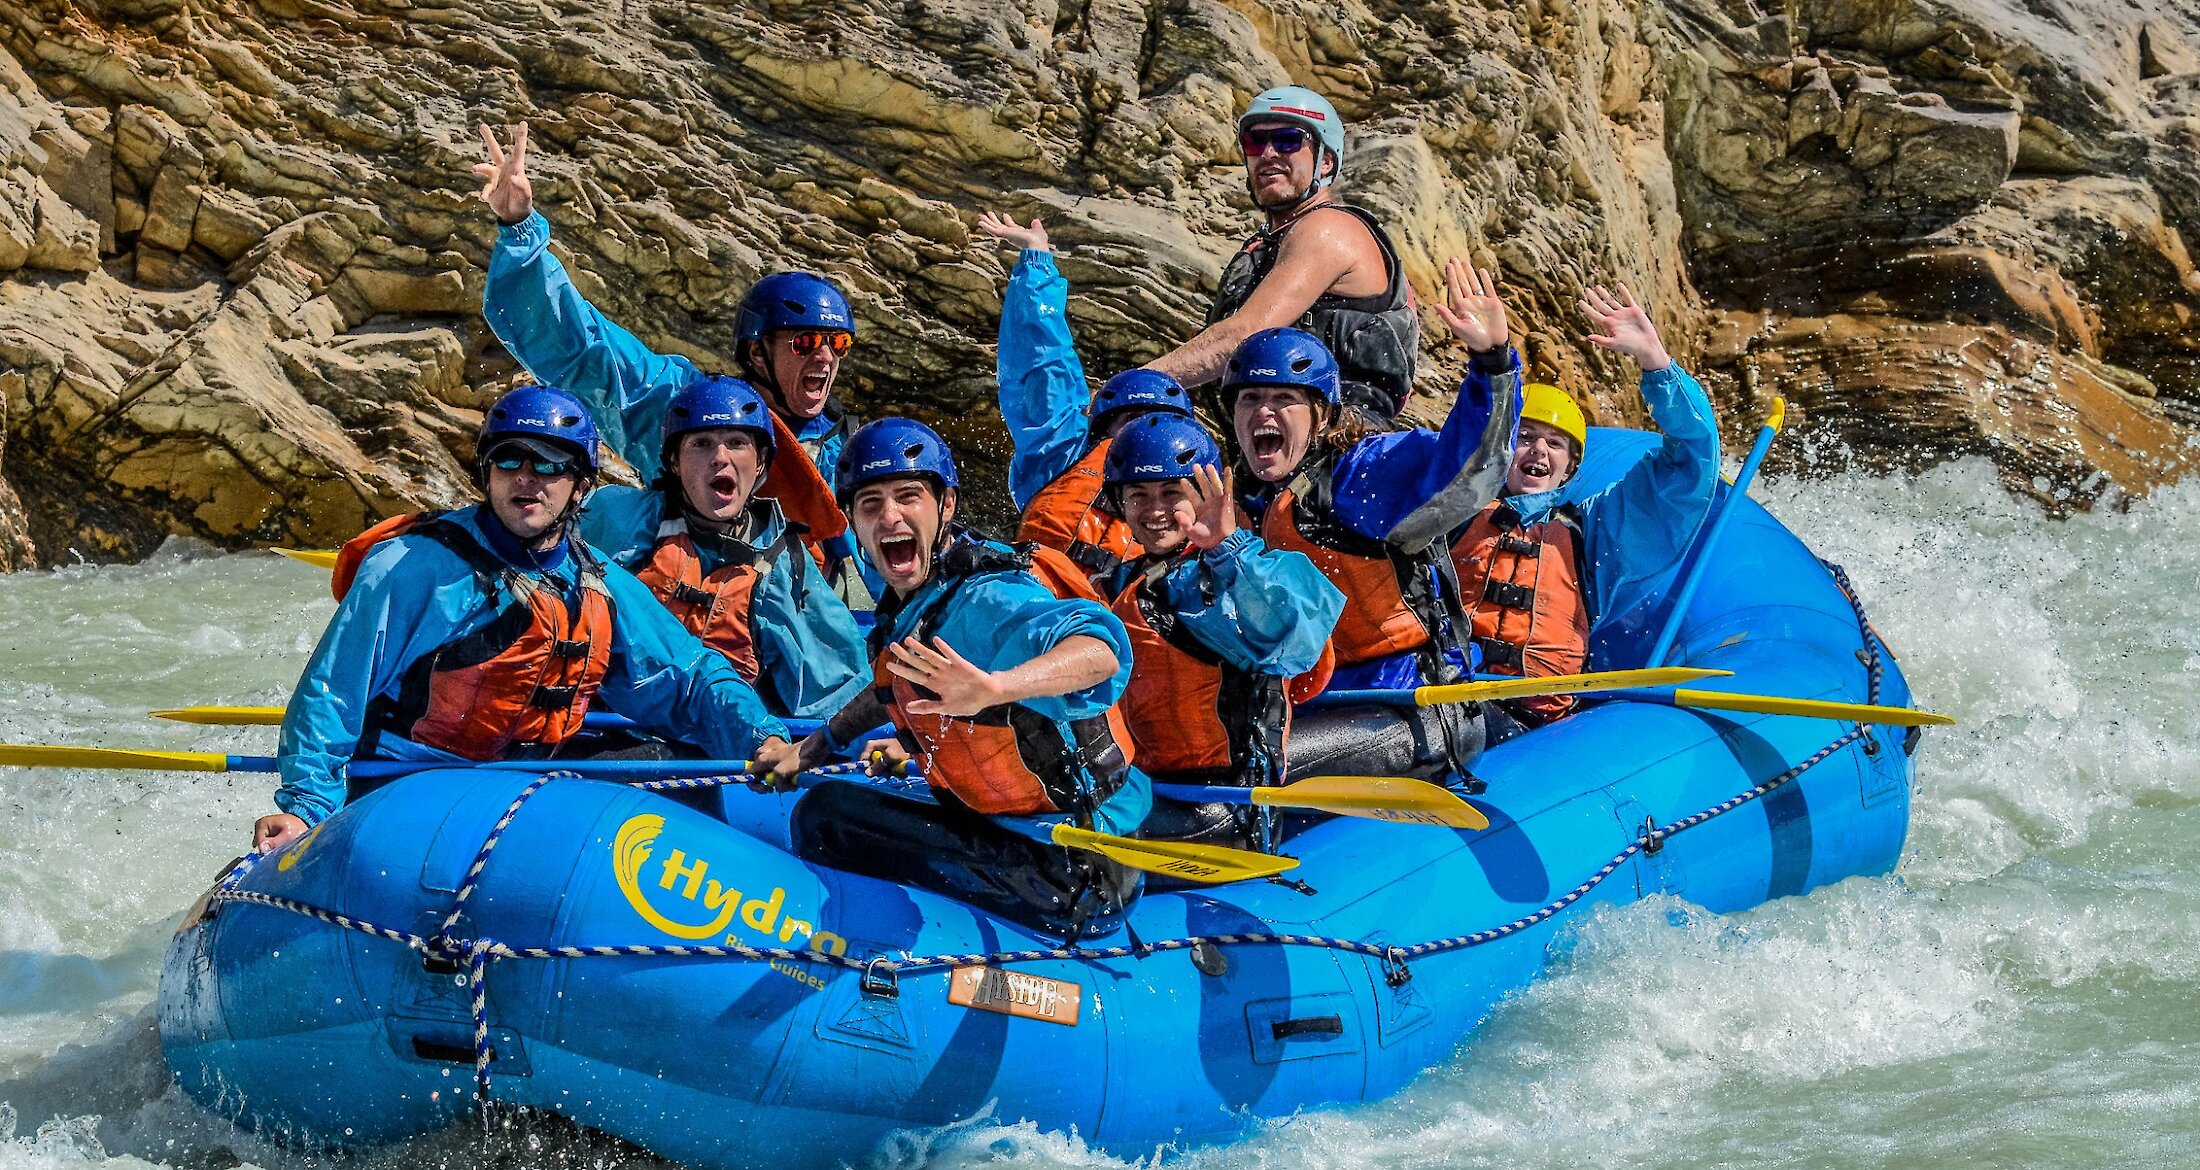 A group of people on a raft on the Kicking Horse River going through the rapids